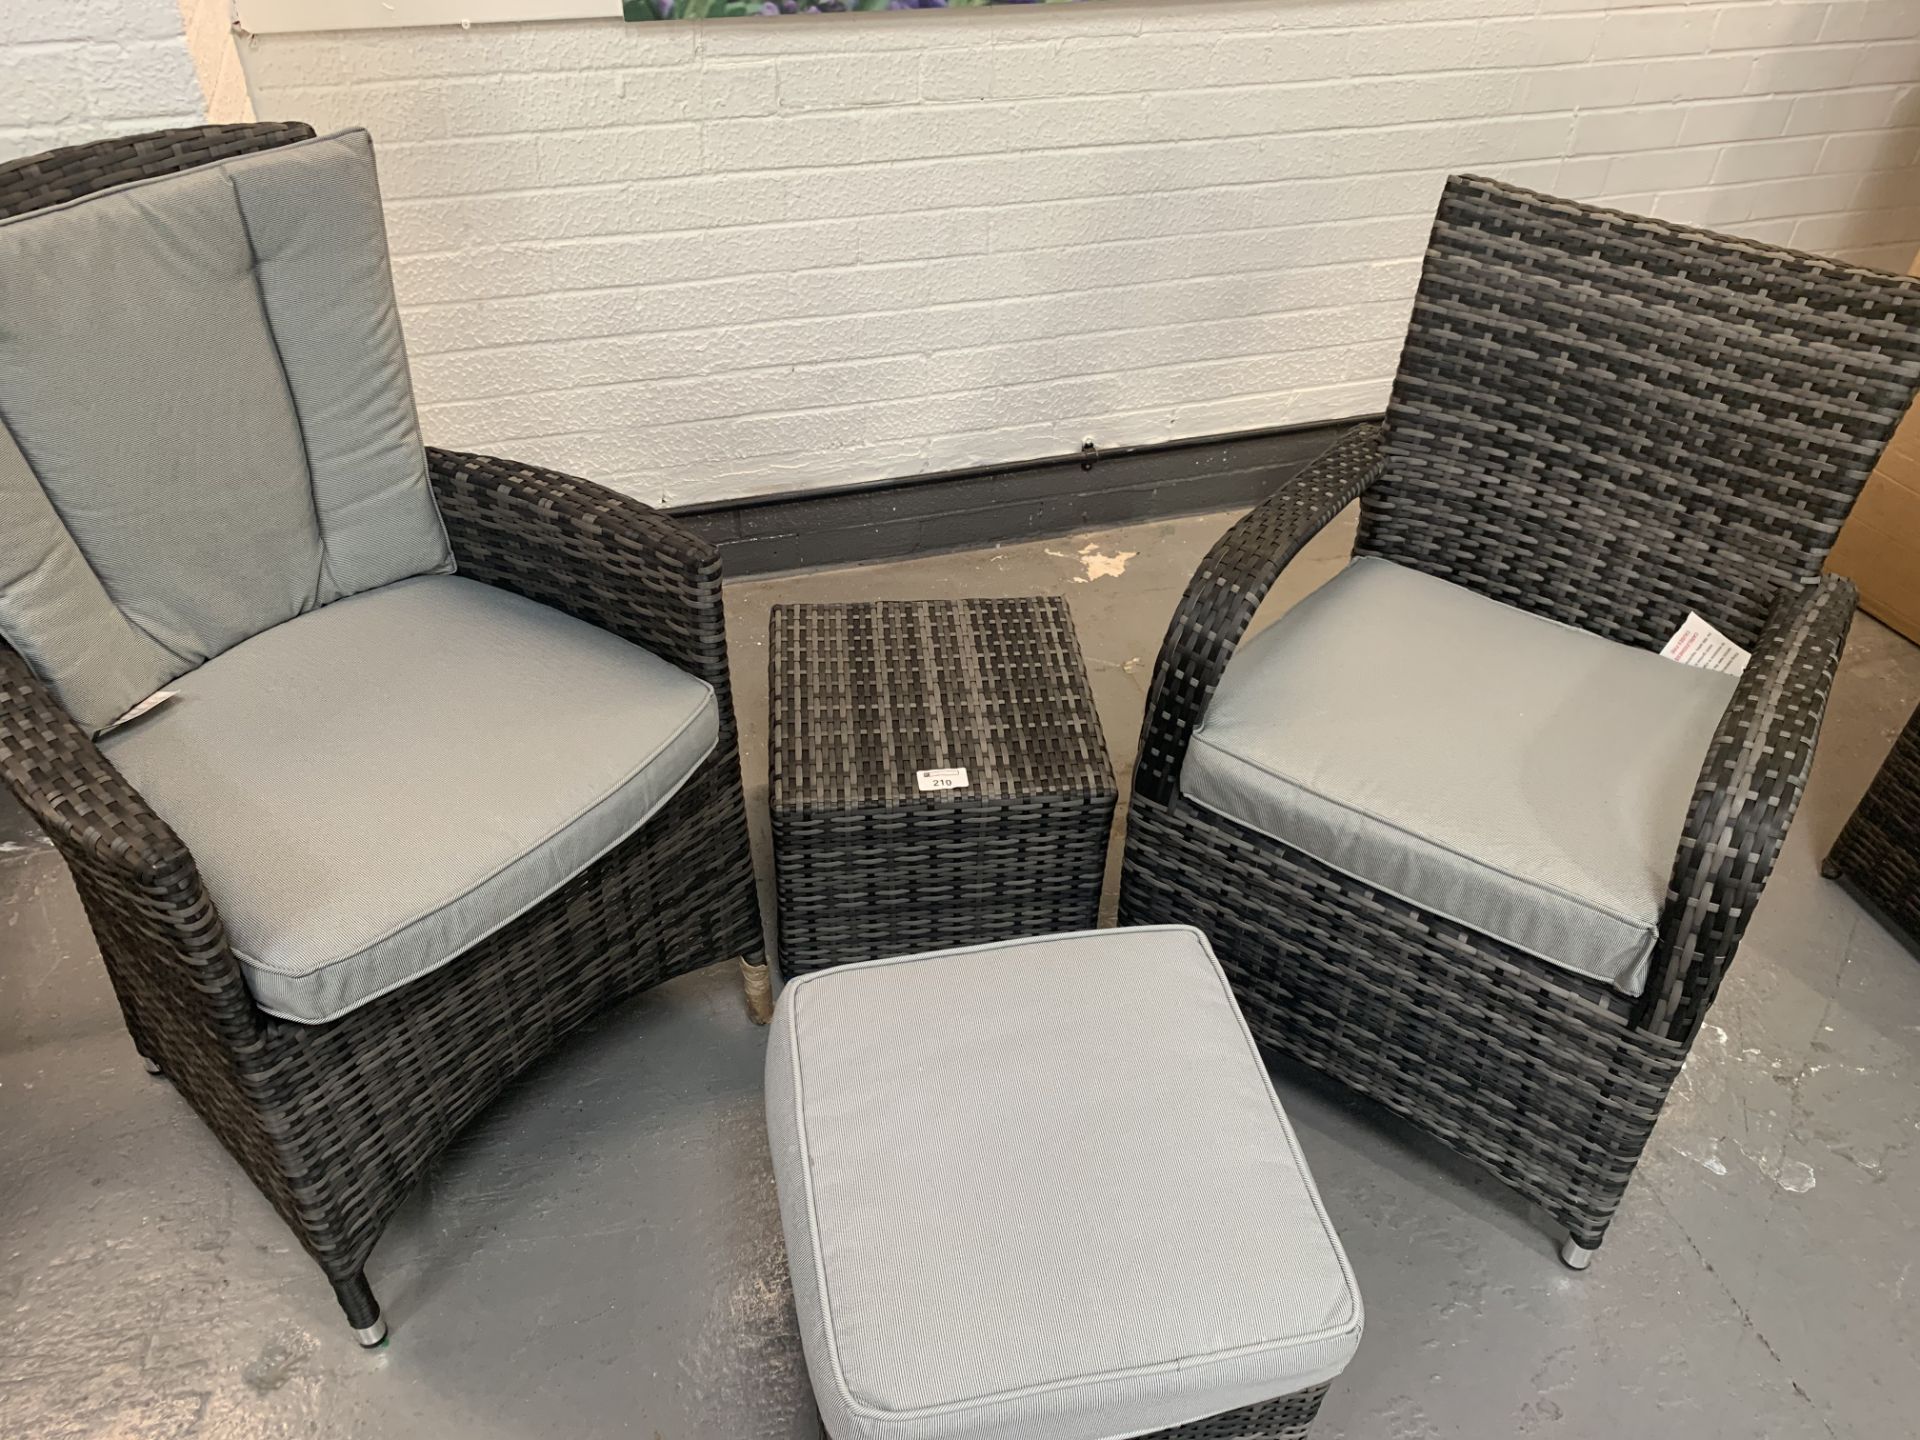 A pair of Grey Maze Rattan arm chairs 1 missing back cushion and 2 footstools - only 1 x cushion